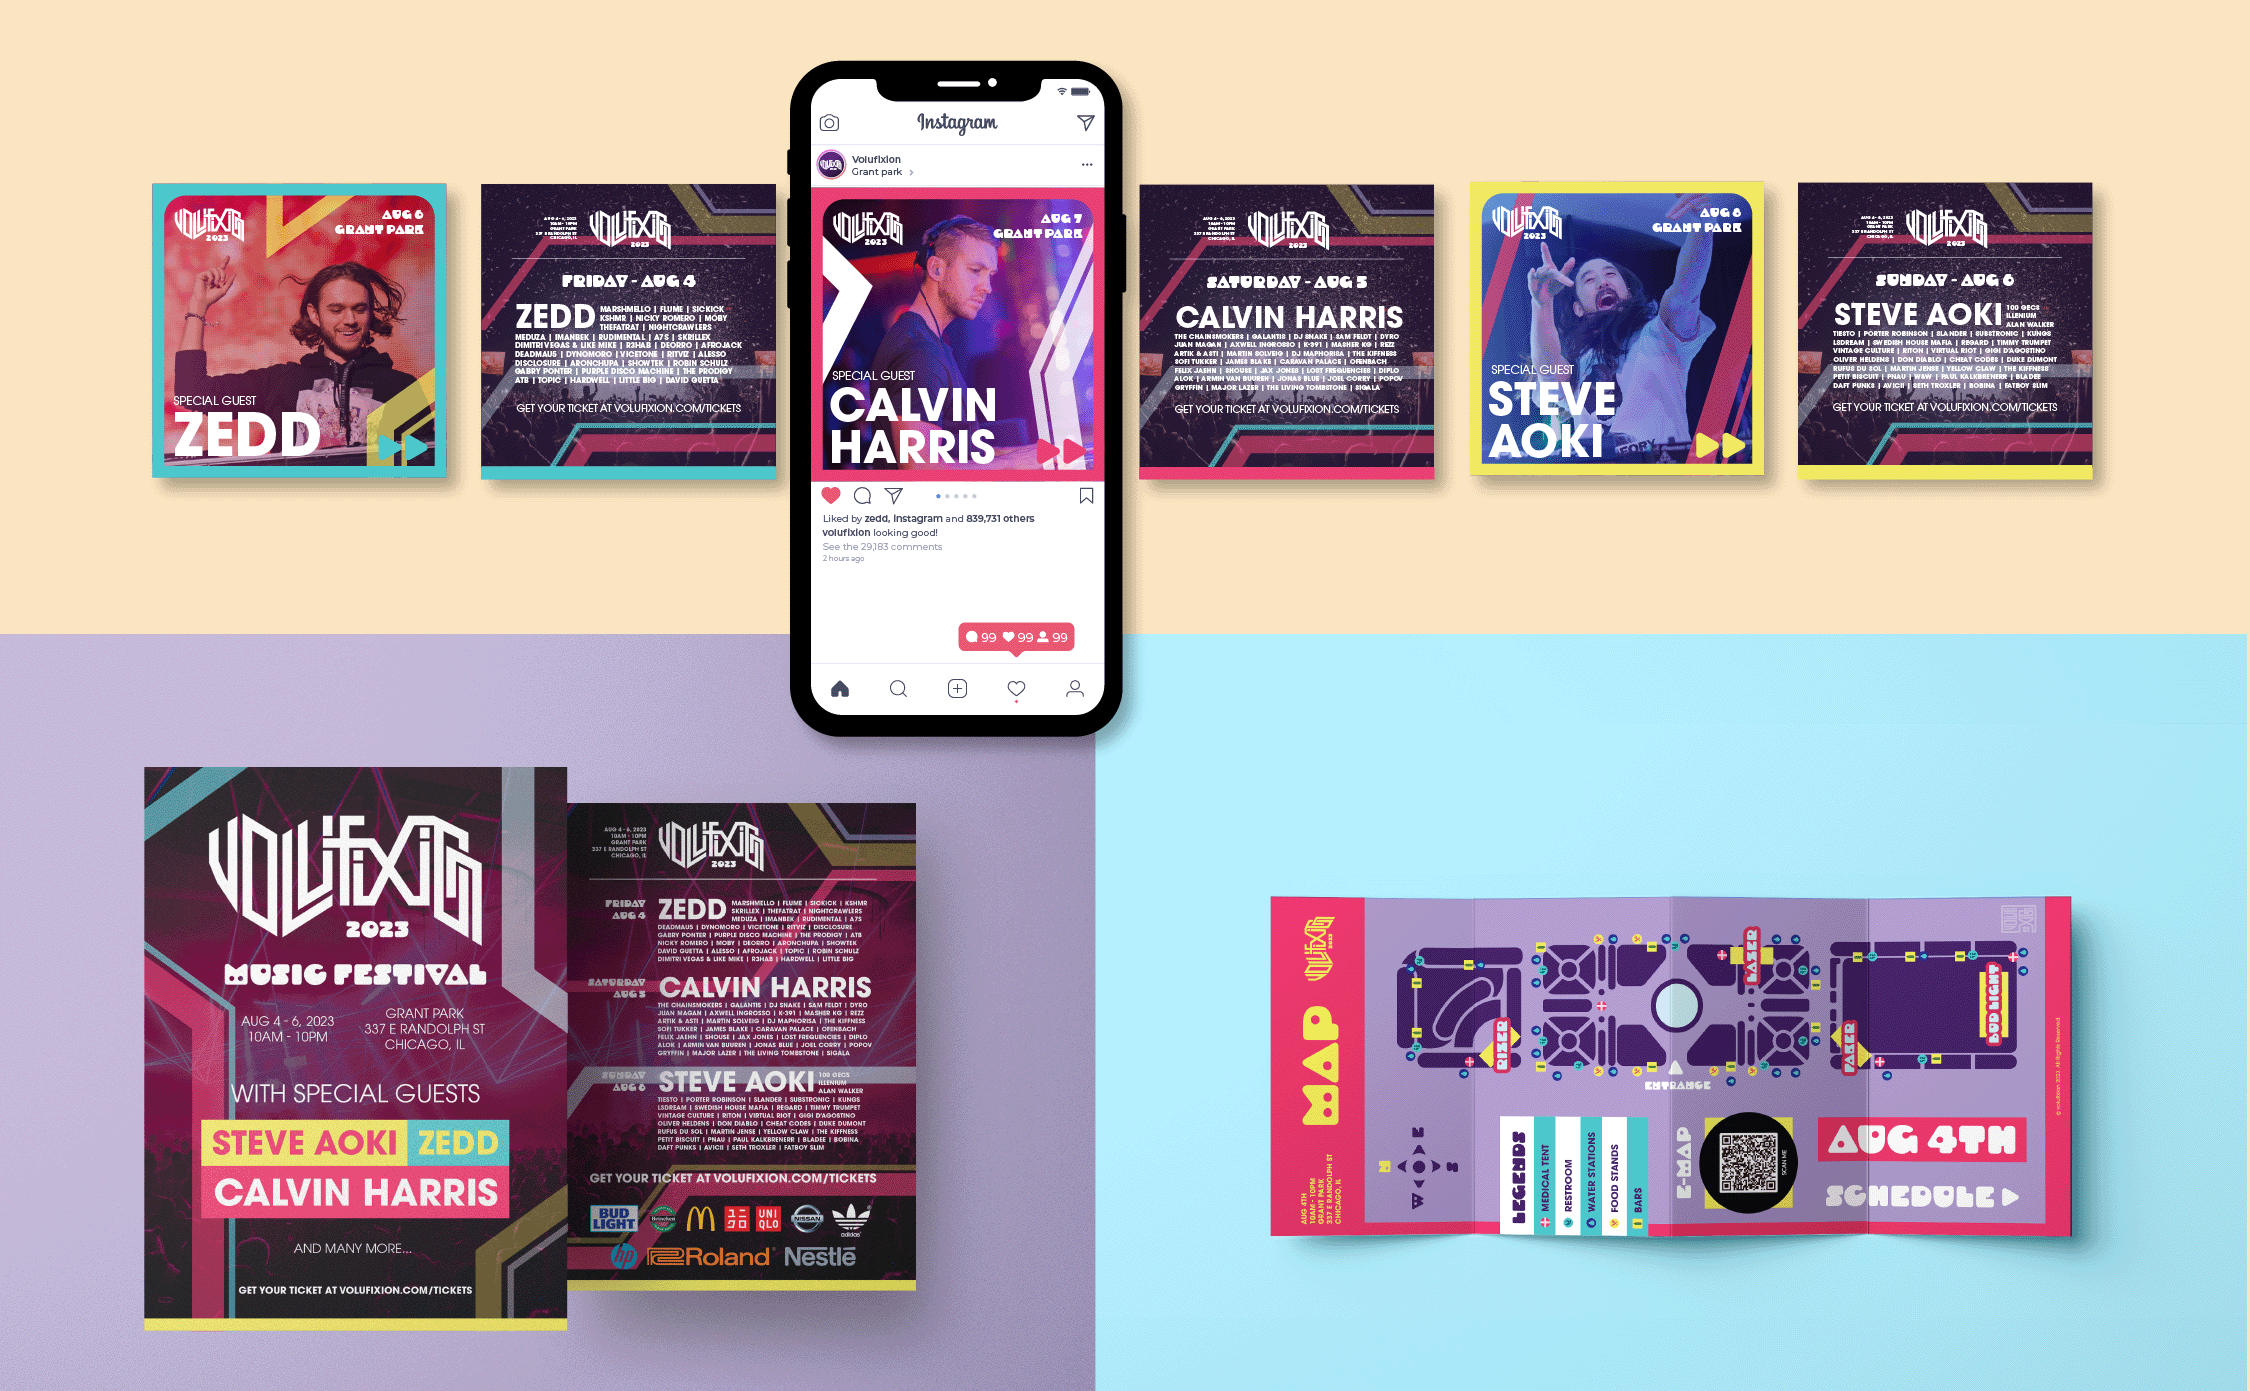 Branding for an electric music festival, Volufixion. Posters, physical map, and social media mockups